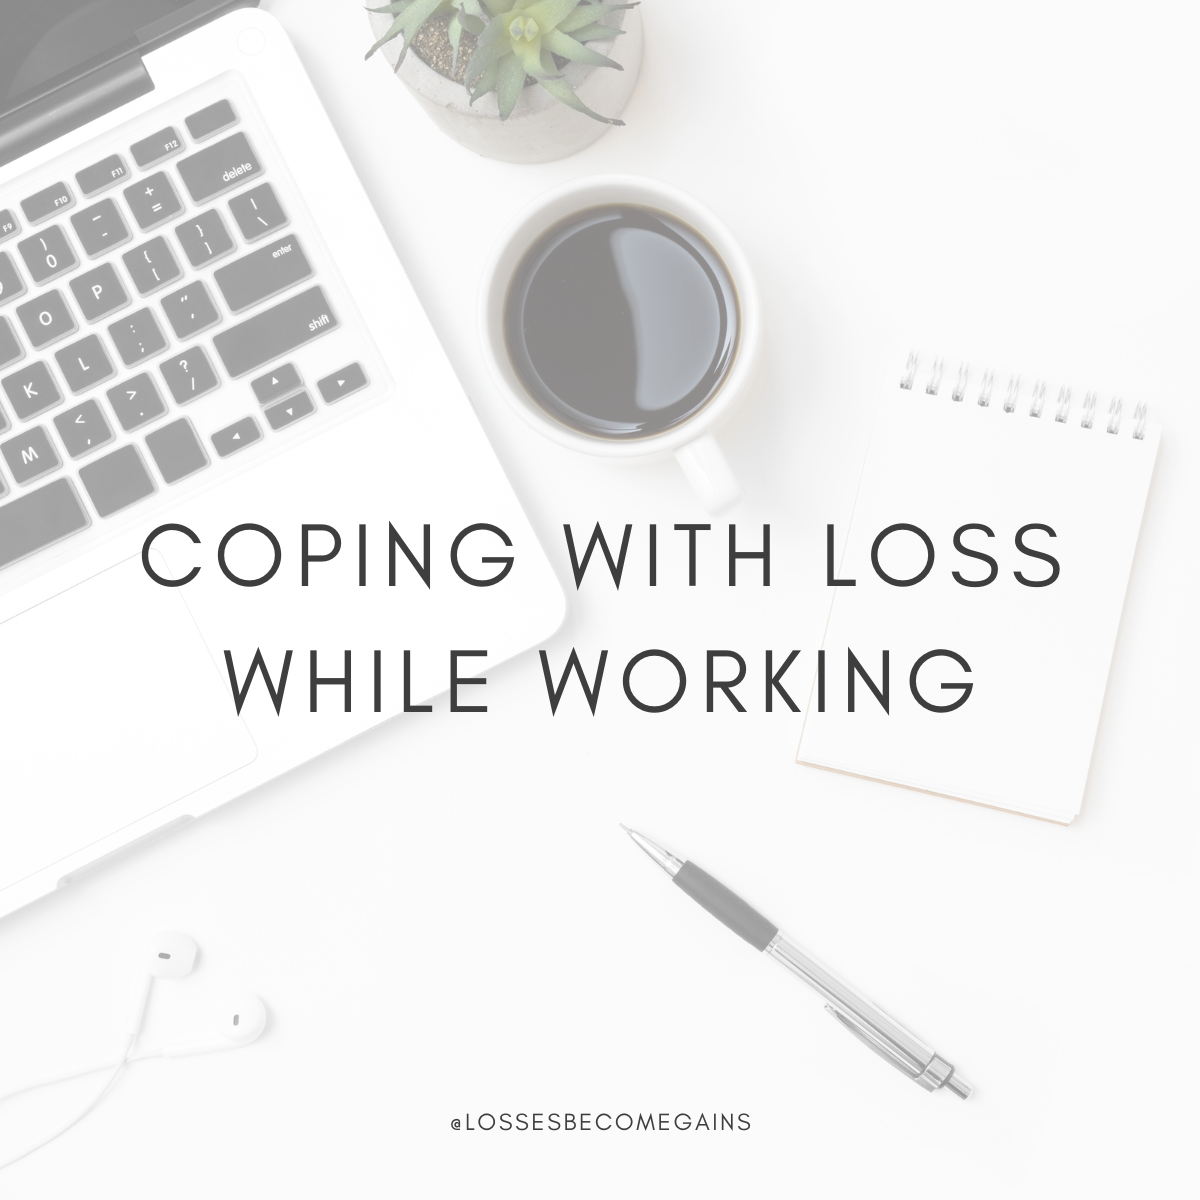 Coping with loss while working text overlay with a laptop and coffee in the background.